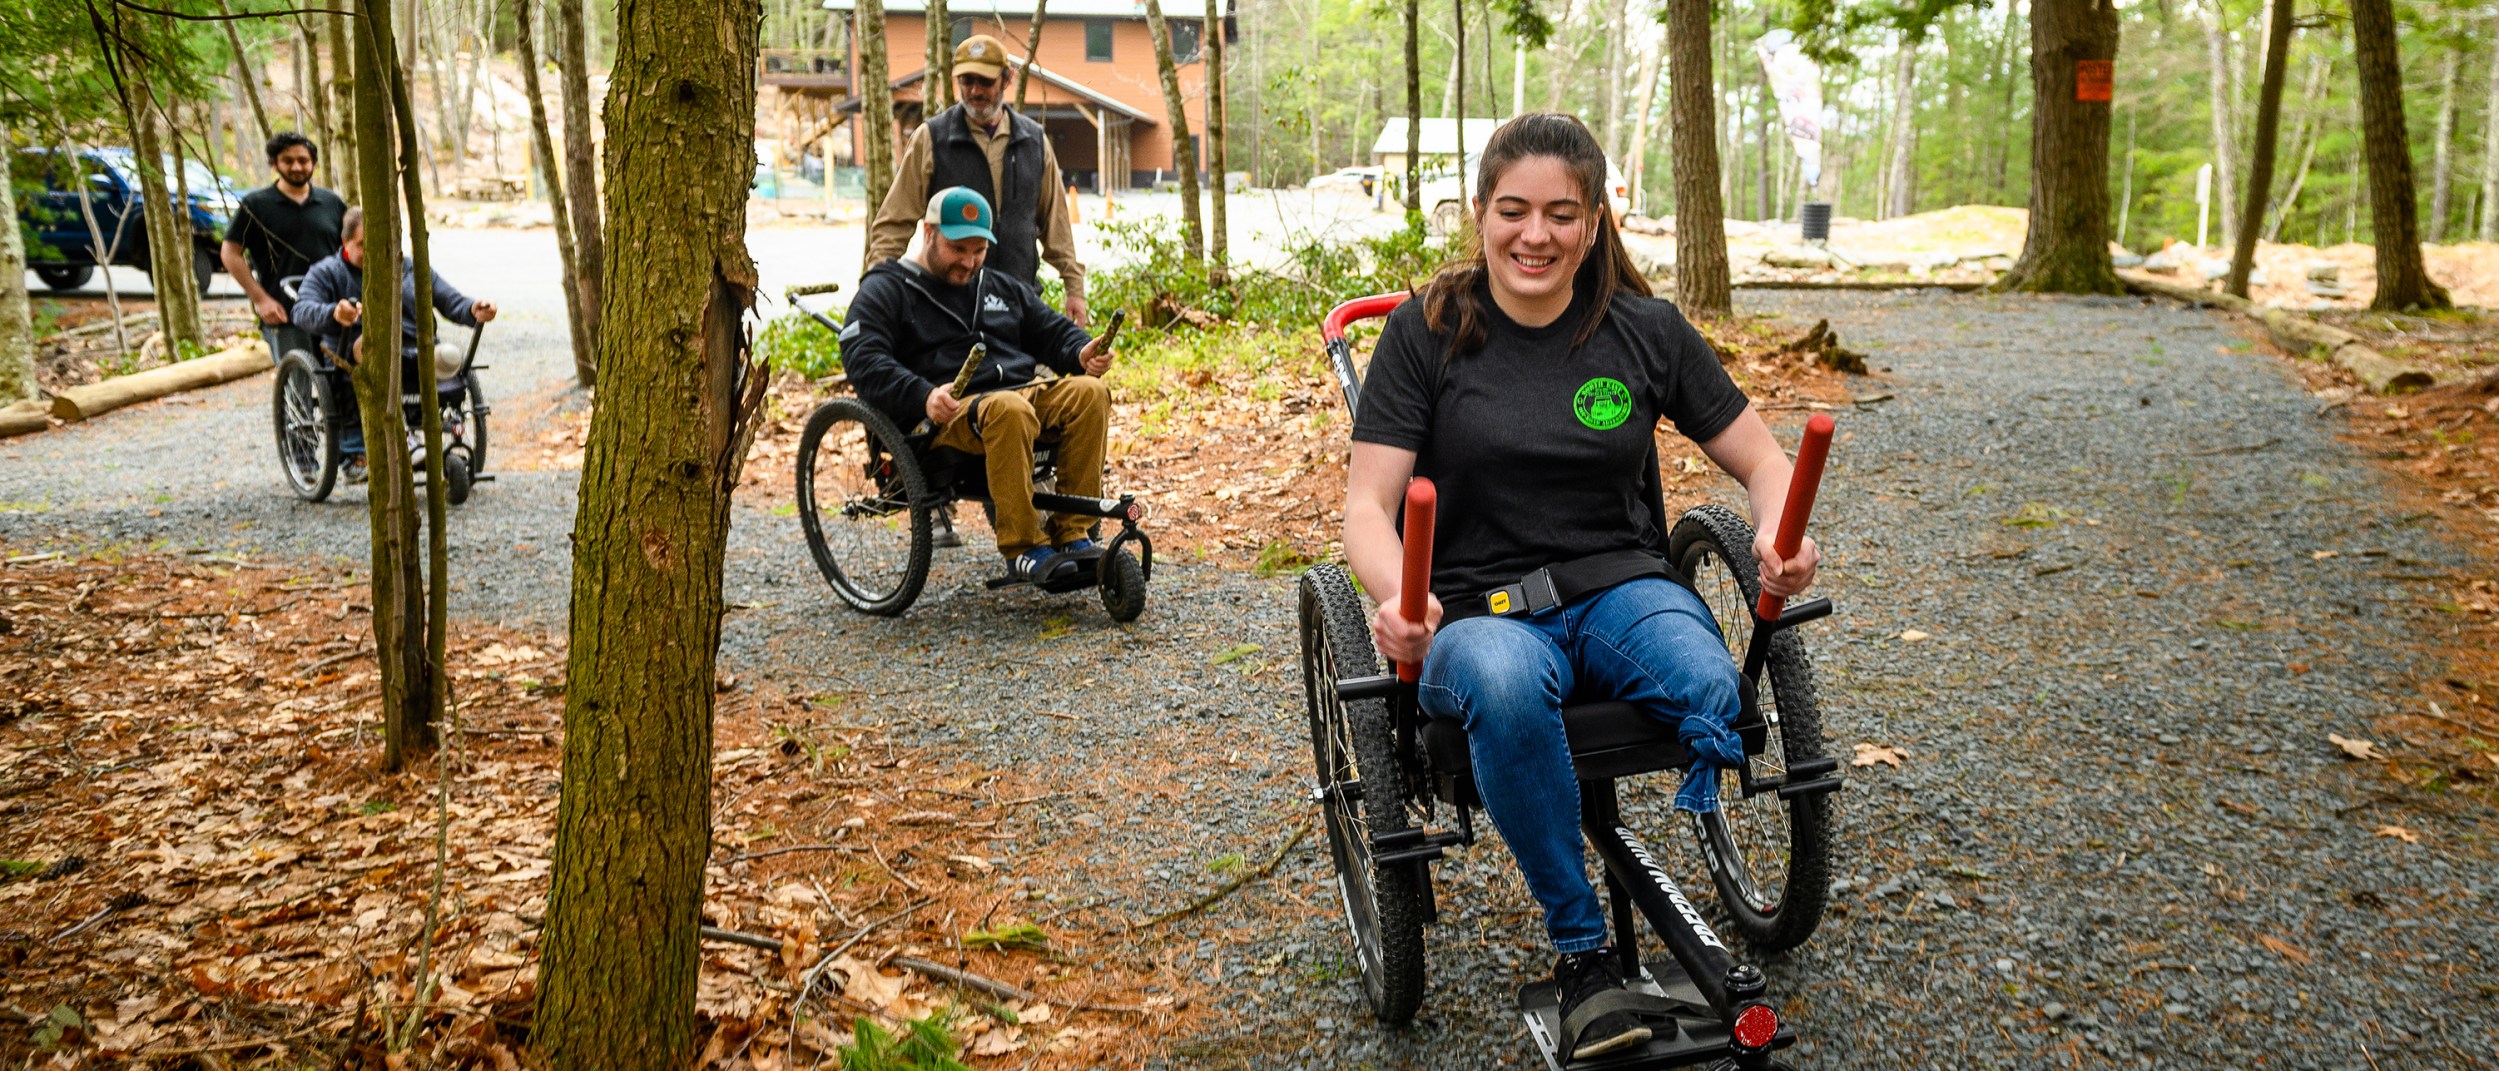 Three people using Grit Freedom Chair wheelchairs along a gravel path between some trees